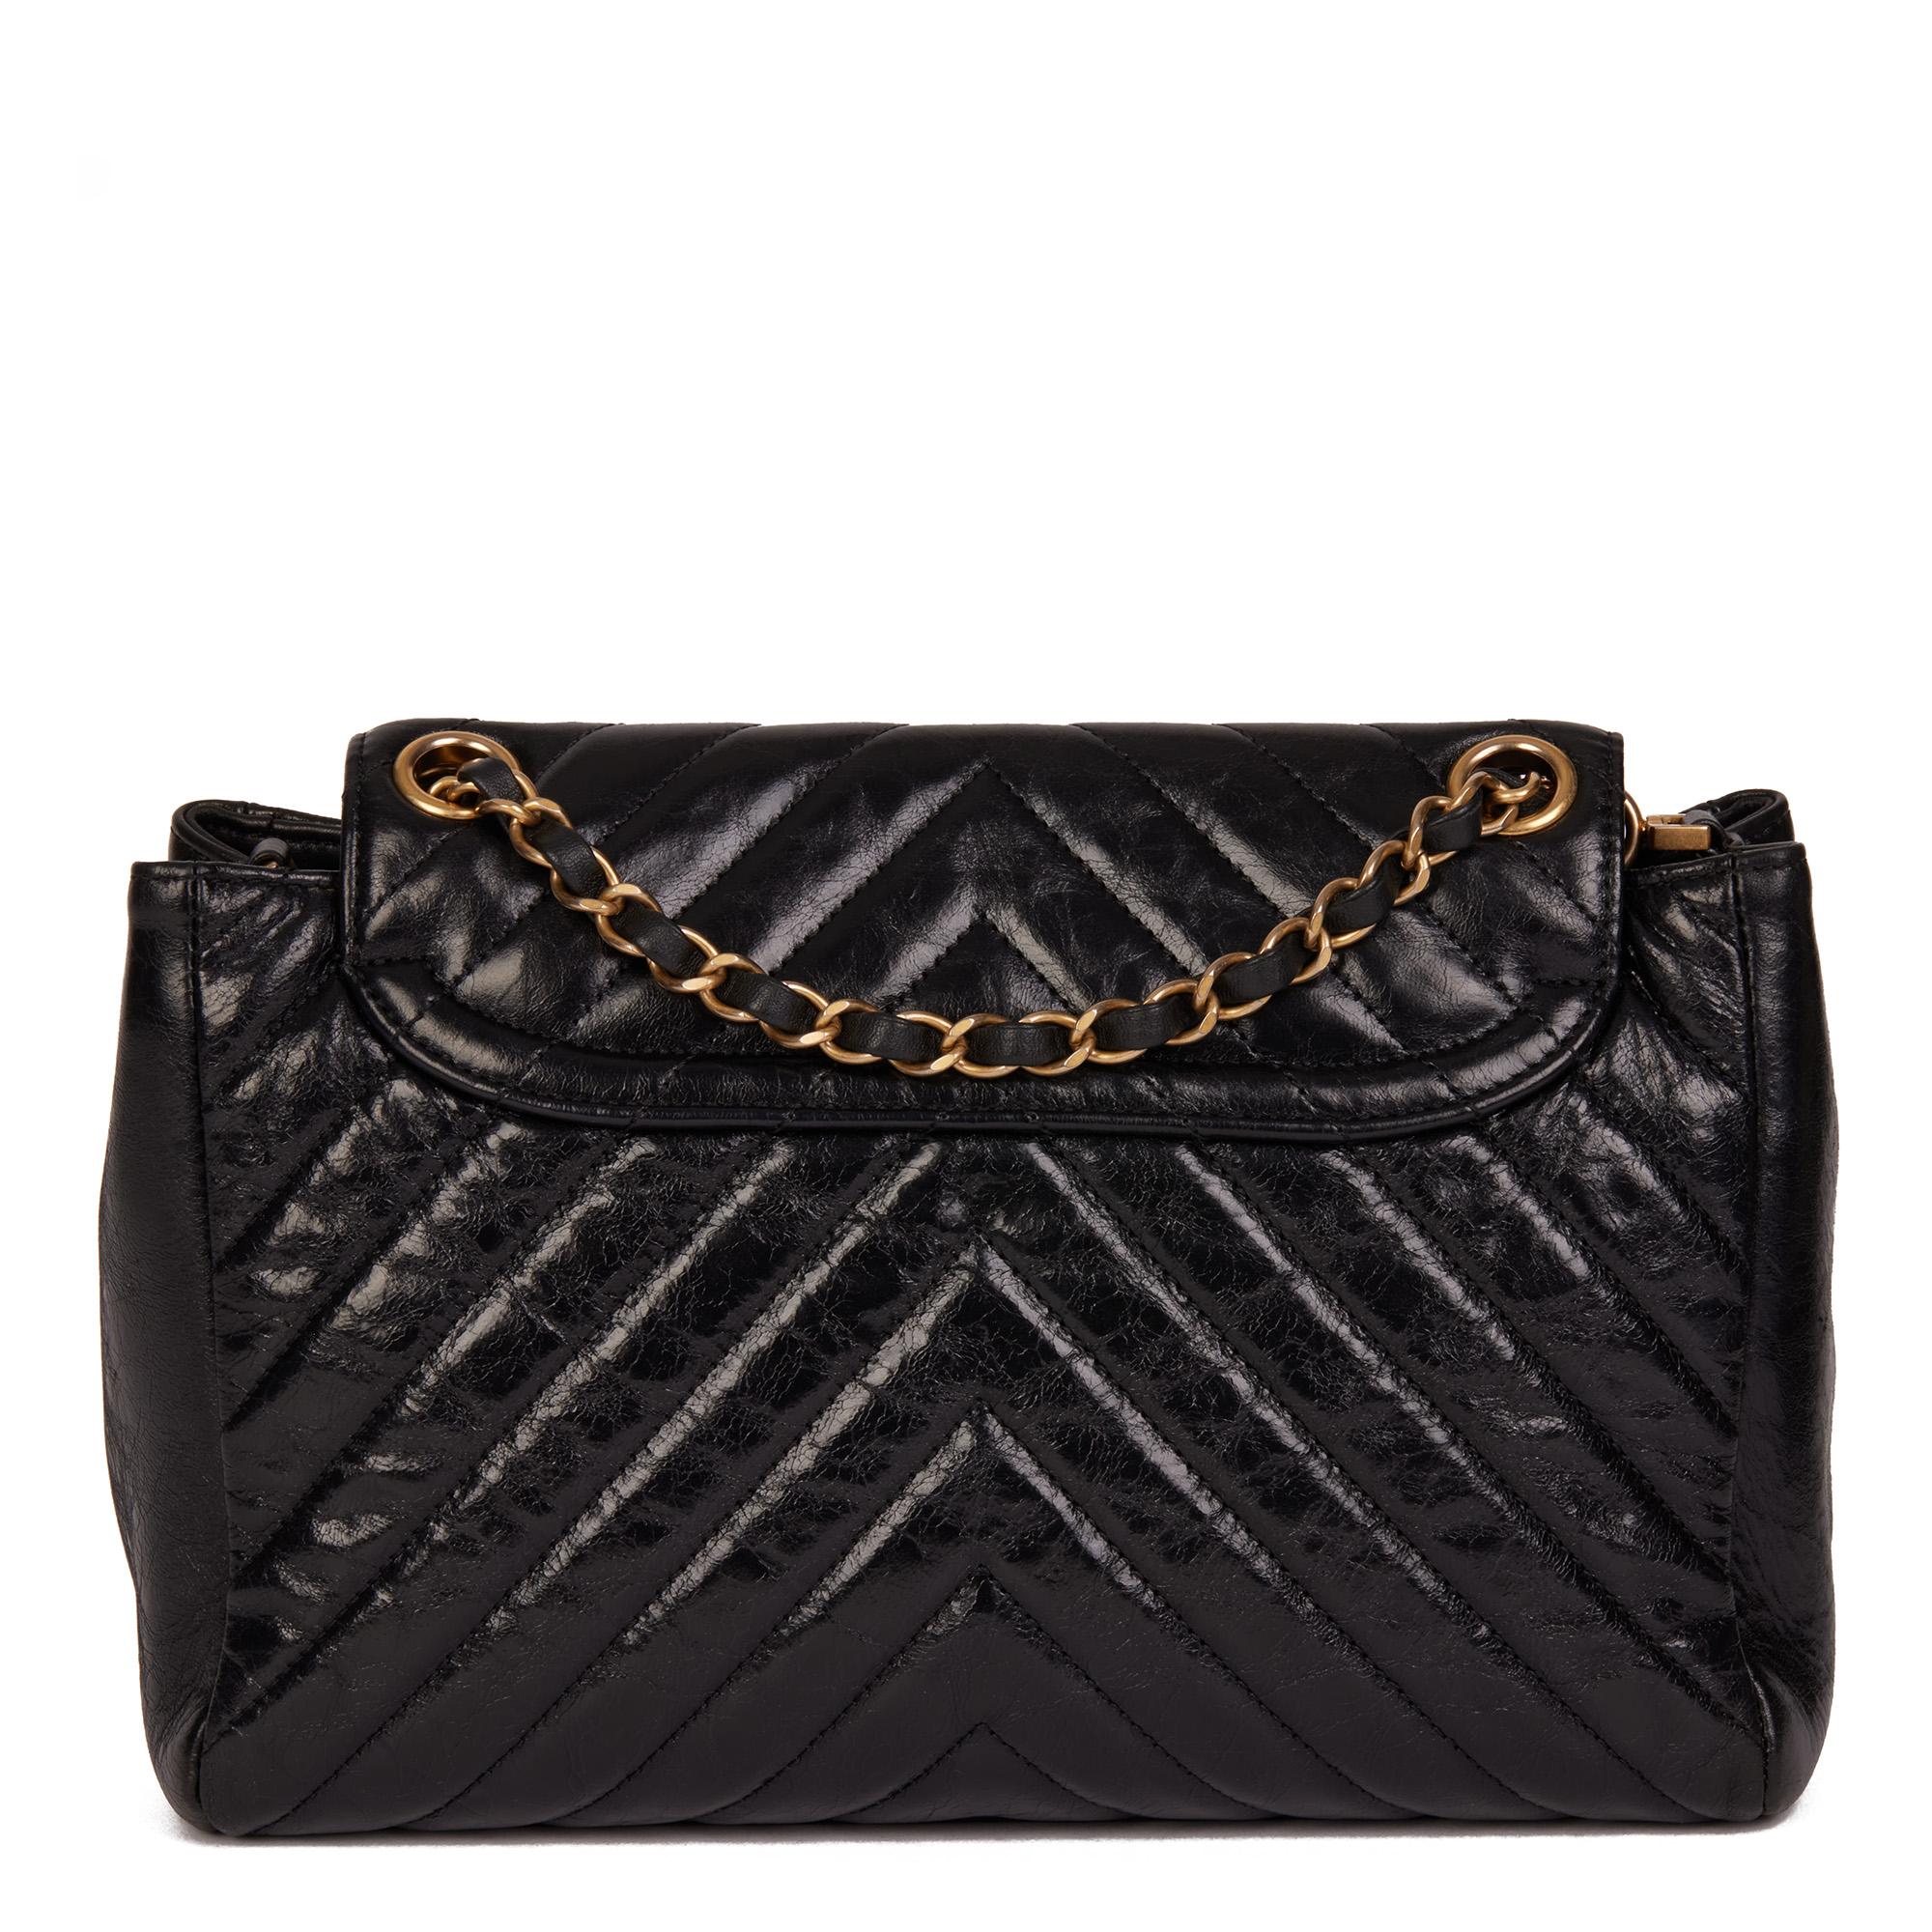 CHANEL Black Chevron Quilted Crumpled Calfskin Leather Classic Single Flap Bag 2